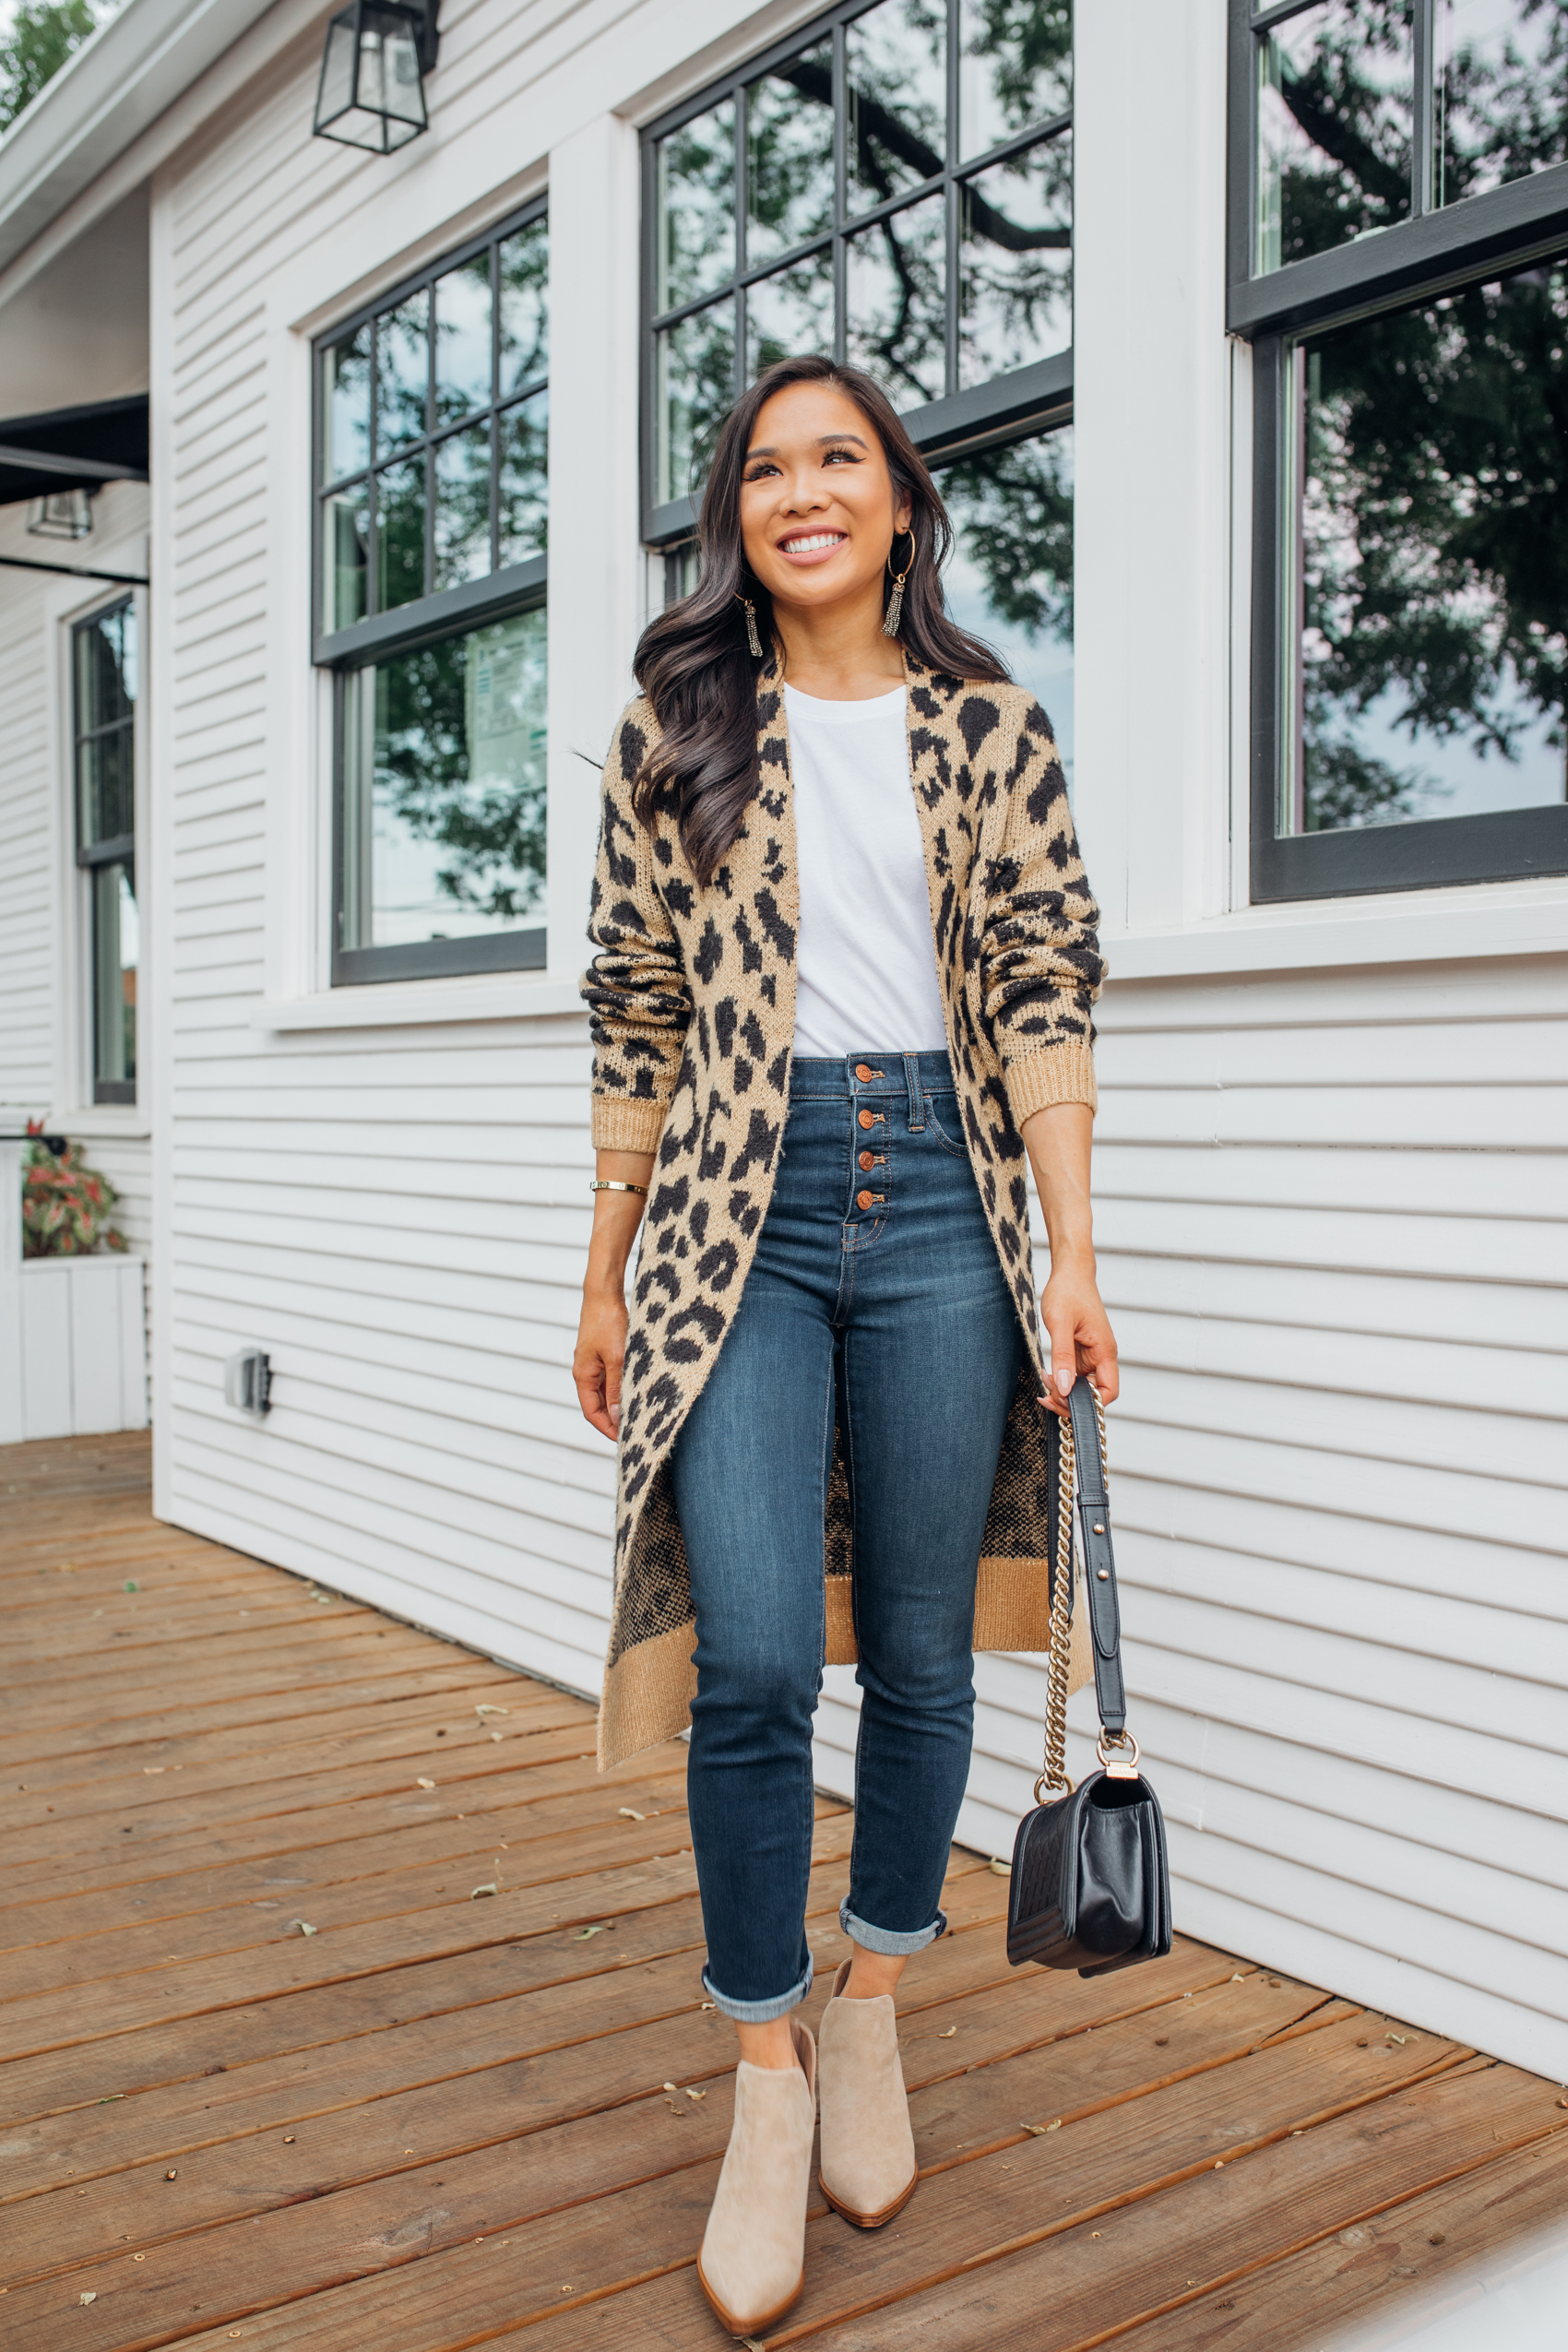 Petite blogger Hoang-Kim wears a leopard cardigan outfit for fall